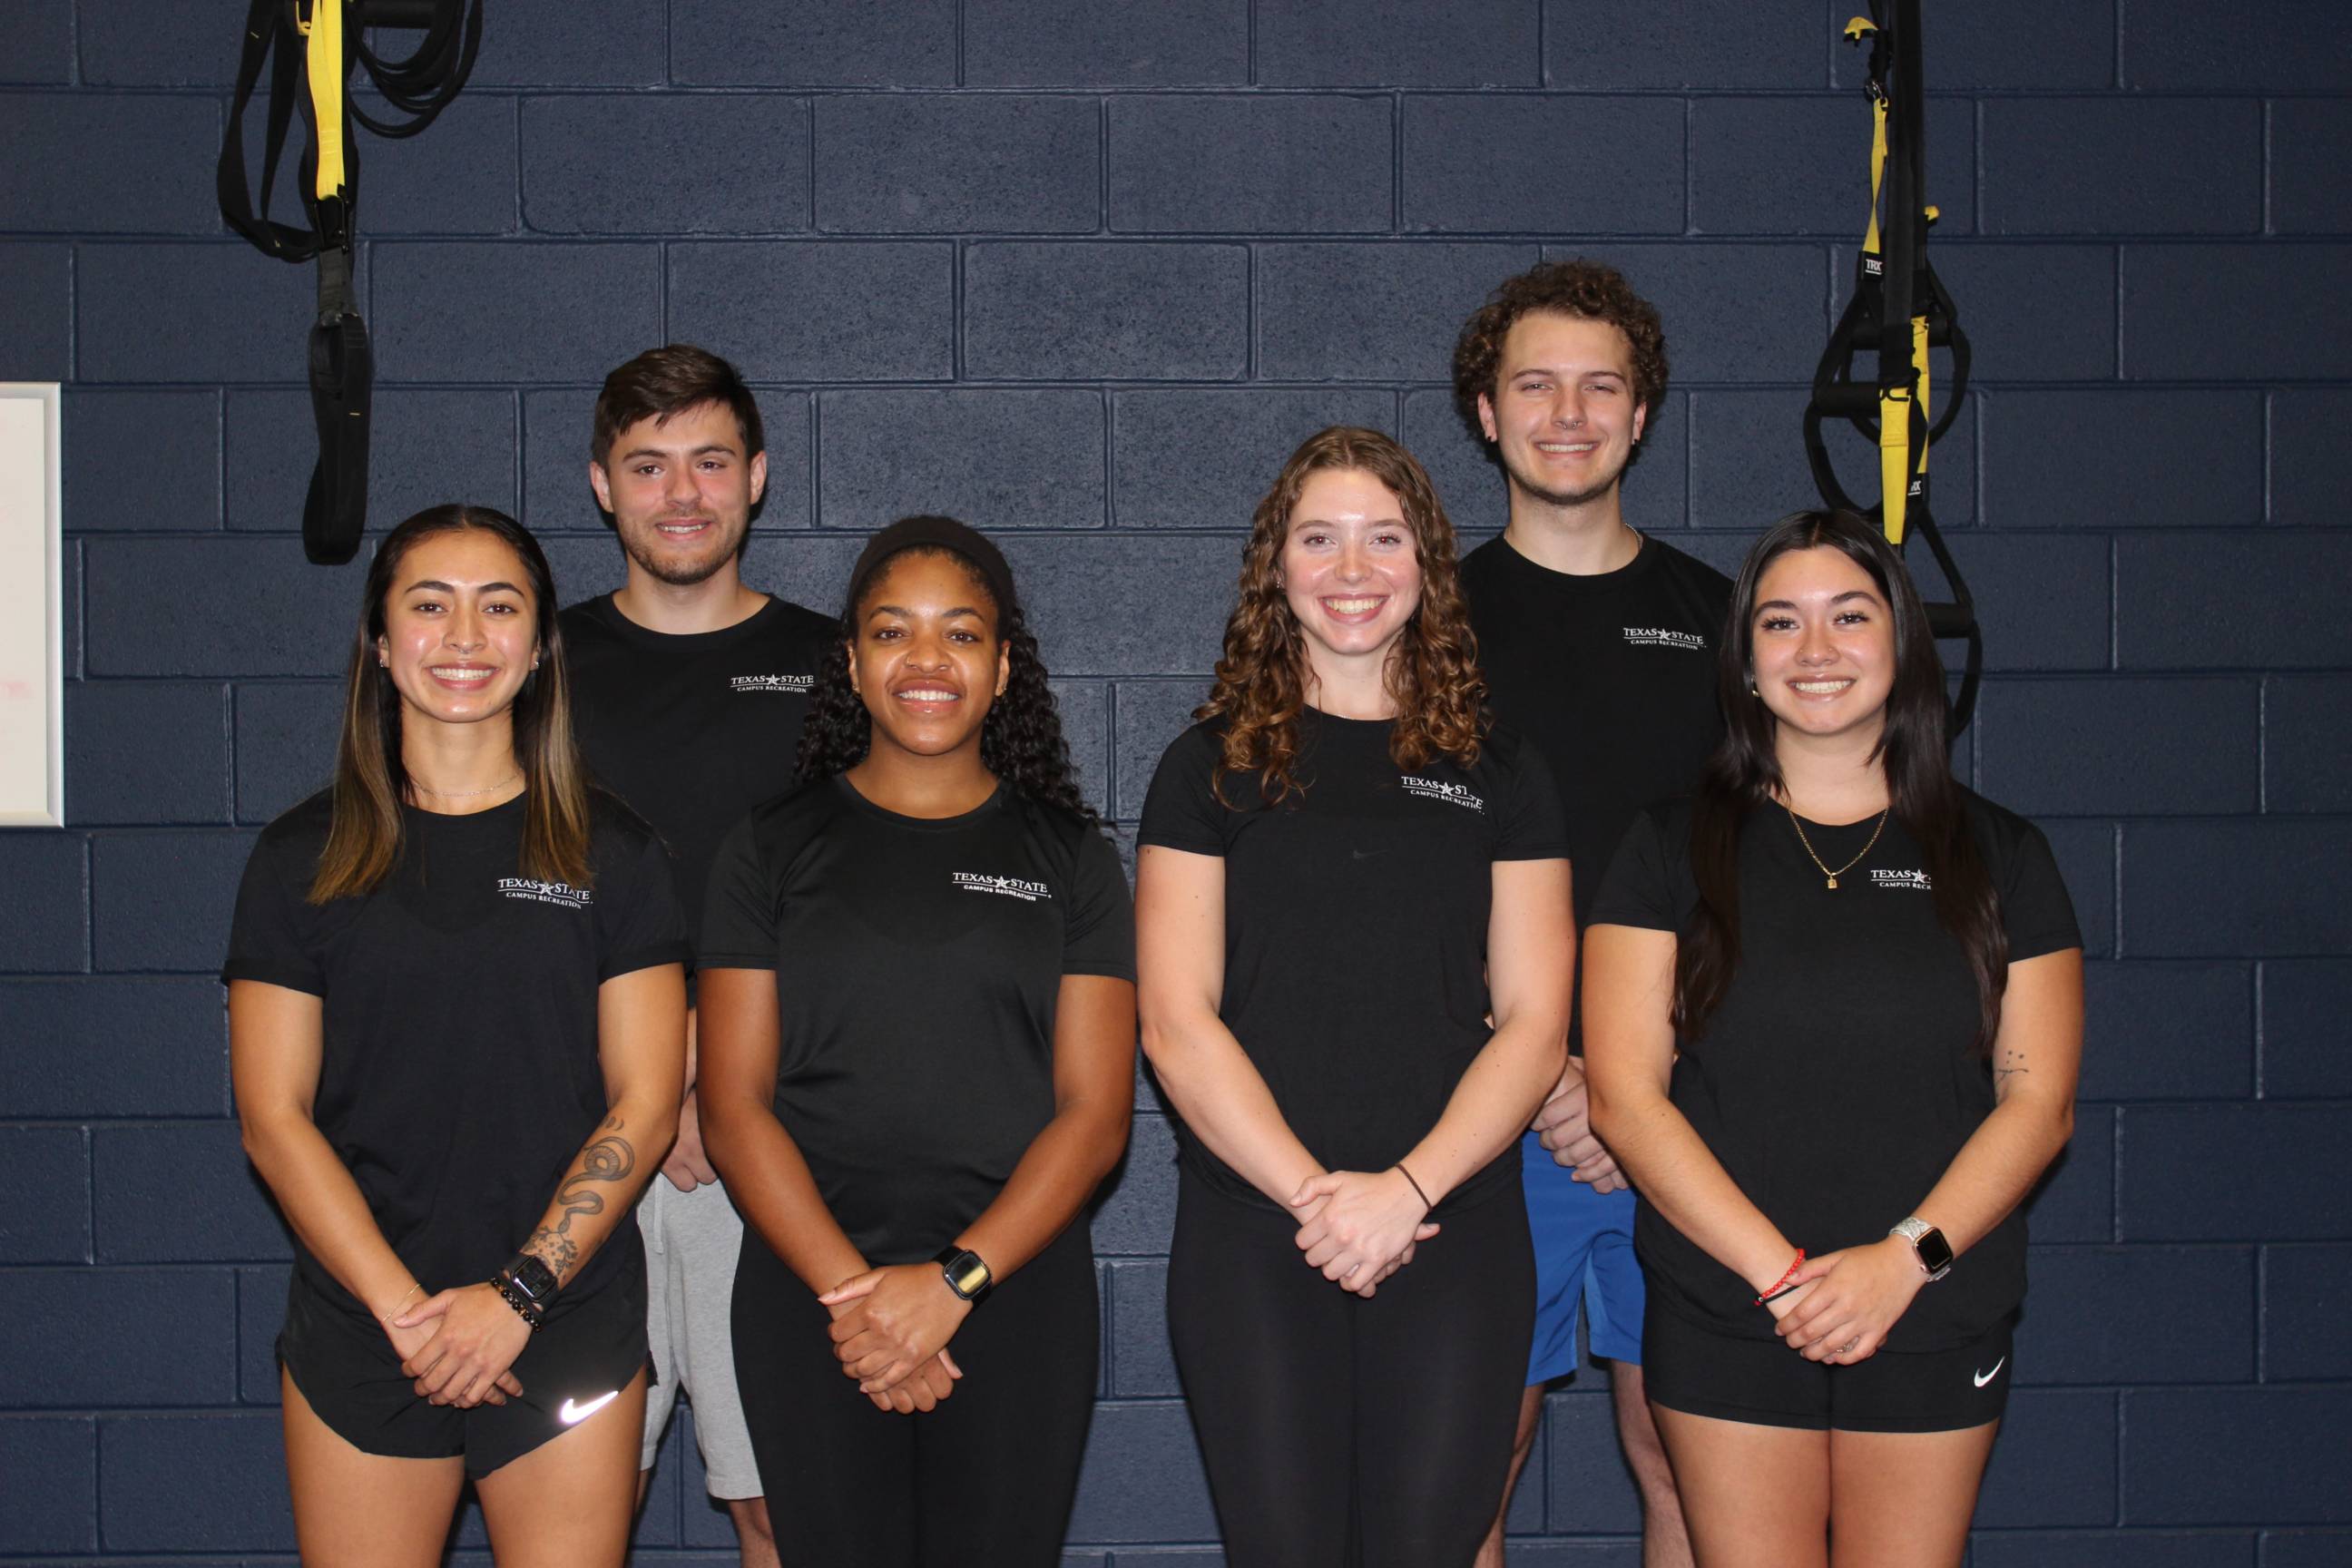 The personal training team